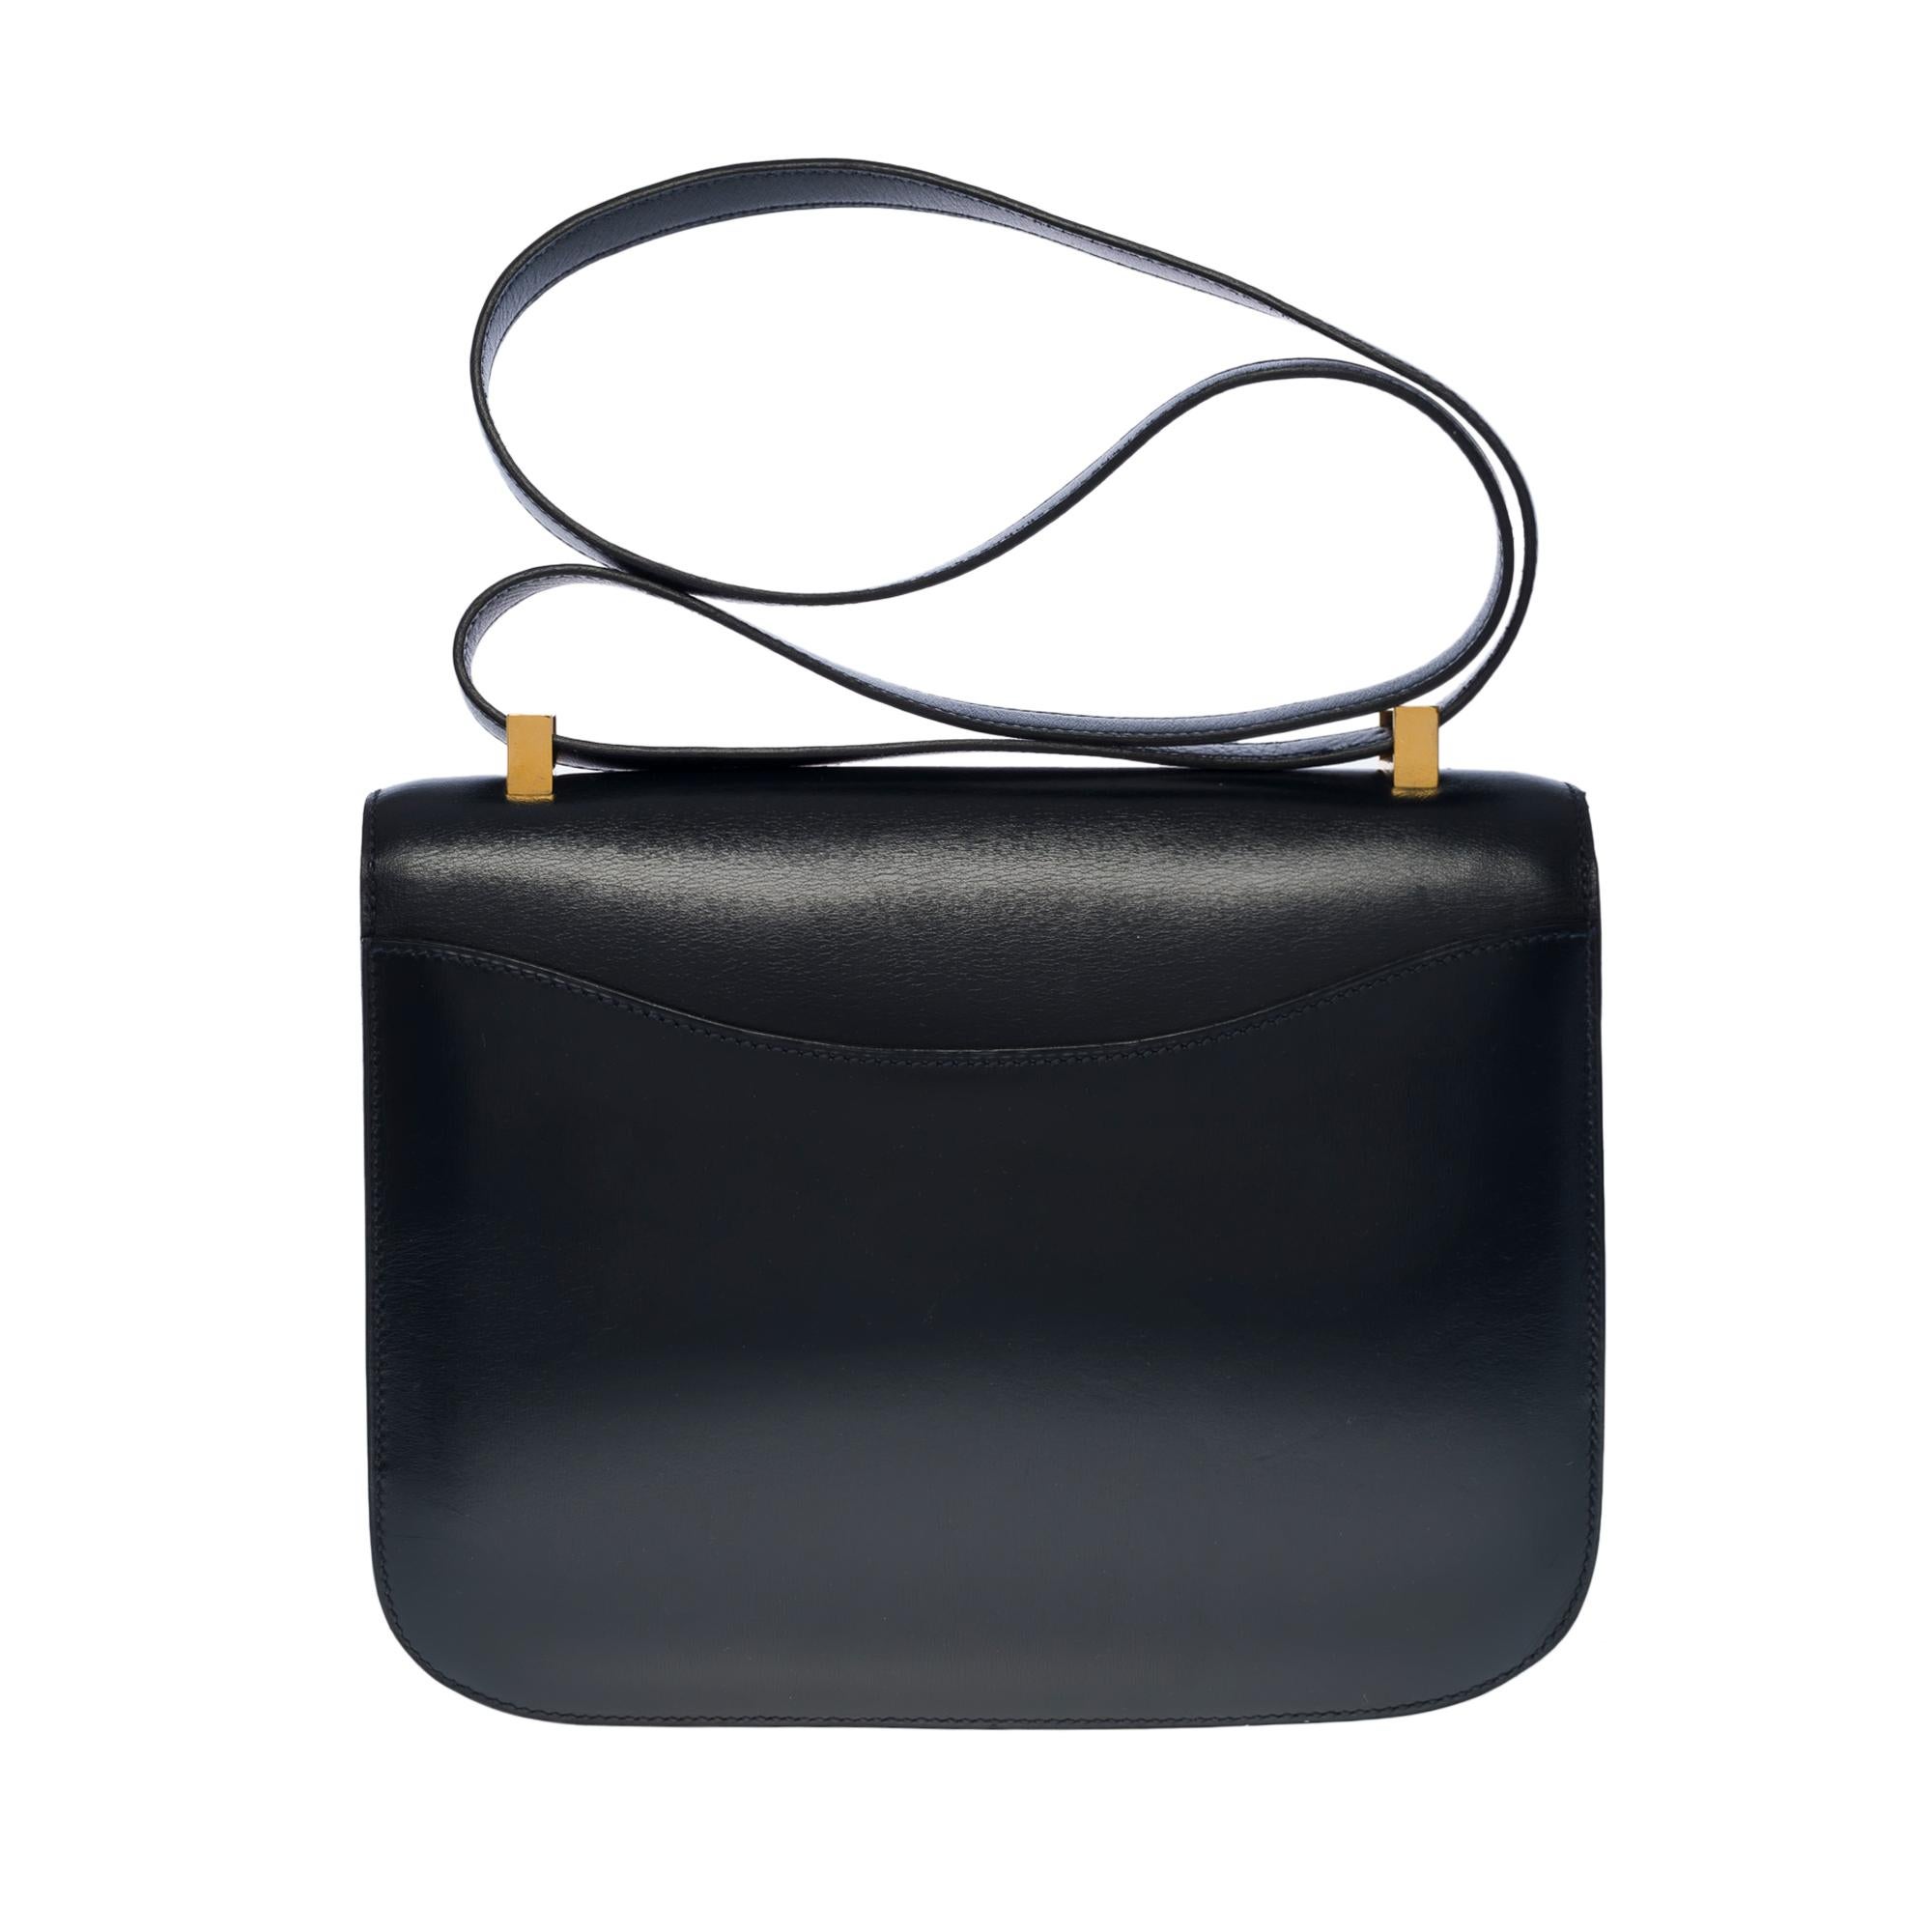 Exquisite Hermes Constance 23 shoulder bag in blue navy boxcalf leather , gold plated metal hardware, convertible handle in blue leather allowing a hand or shoulder support

Closure marked H on flap
A patch pocket on the back of the bag
Navy blue